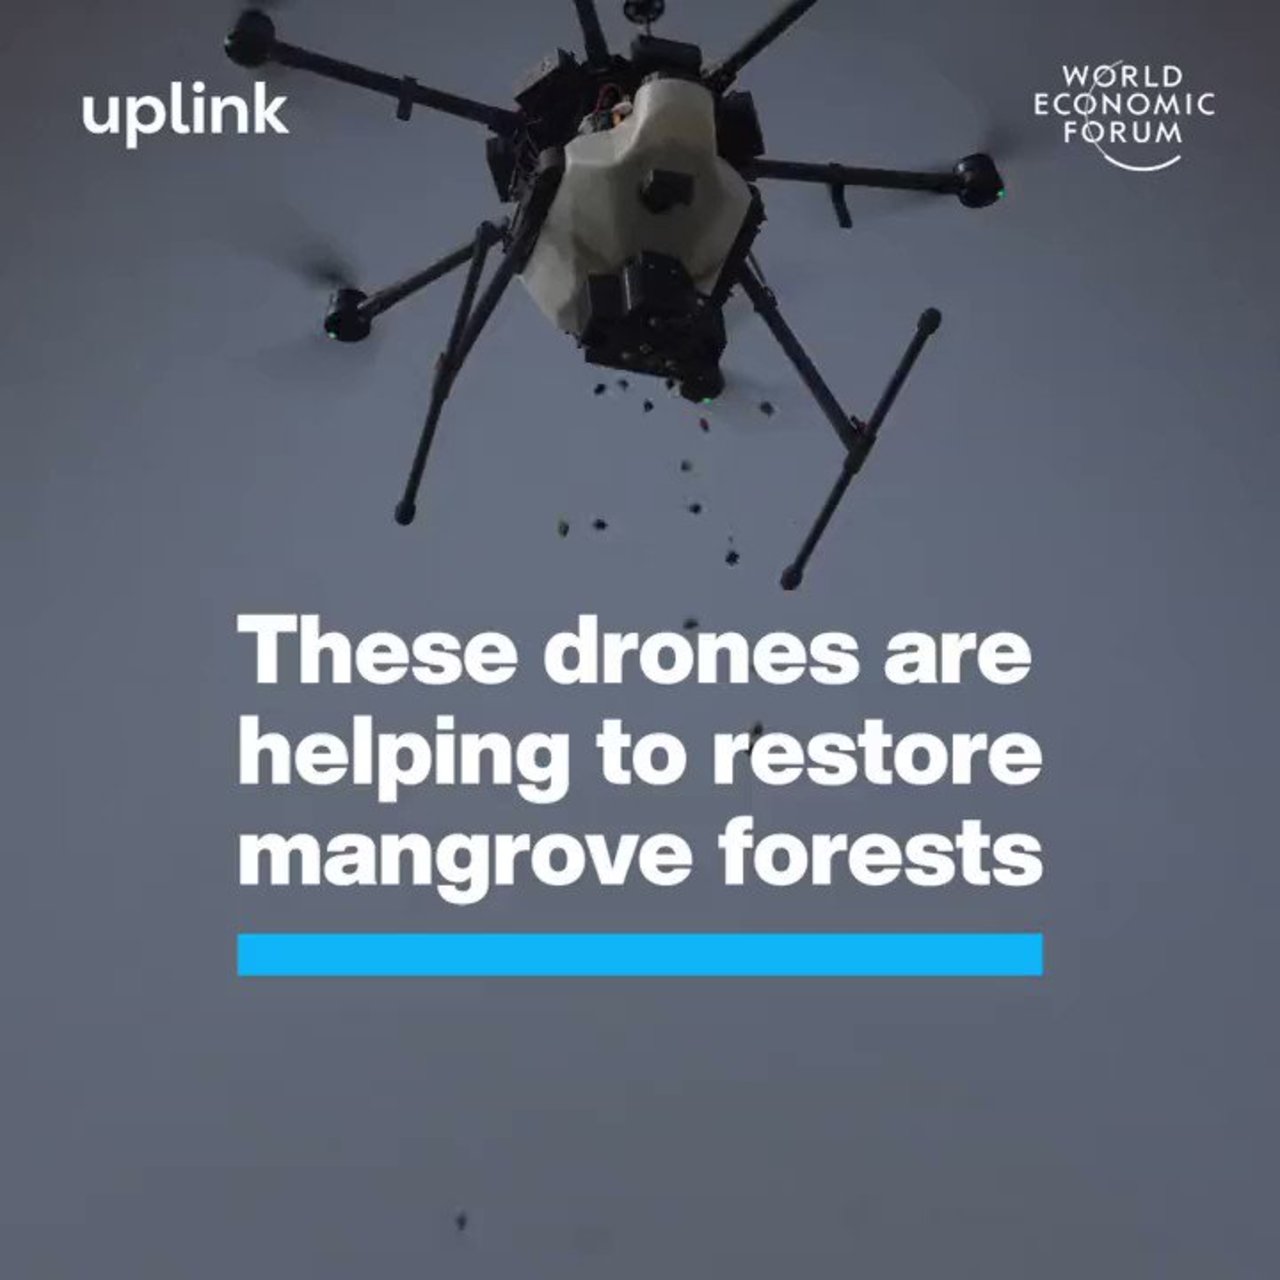 These #Drones are helping to restore mangrove forests by @wef #MachineLearning #AI #ArtificialIntelligence #Sustainability #Innovation #Tech #Technology cc: @maxjcm @ronald_vanloon @pascal_bornet @marcusborba https://t.co/mOaaqAfgT2